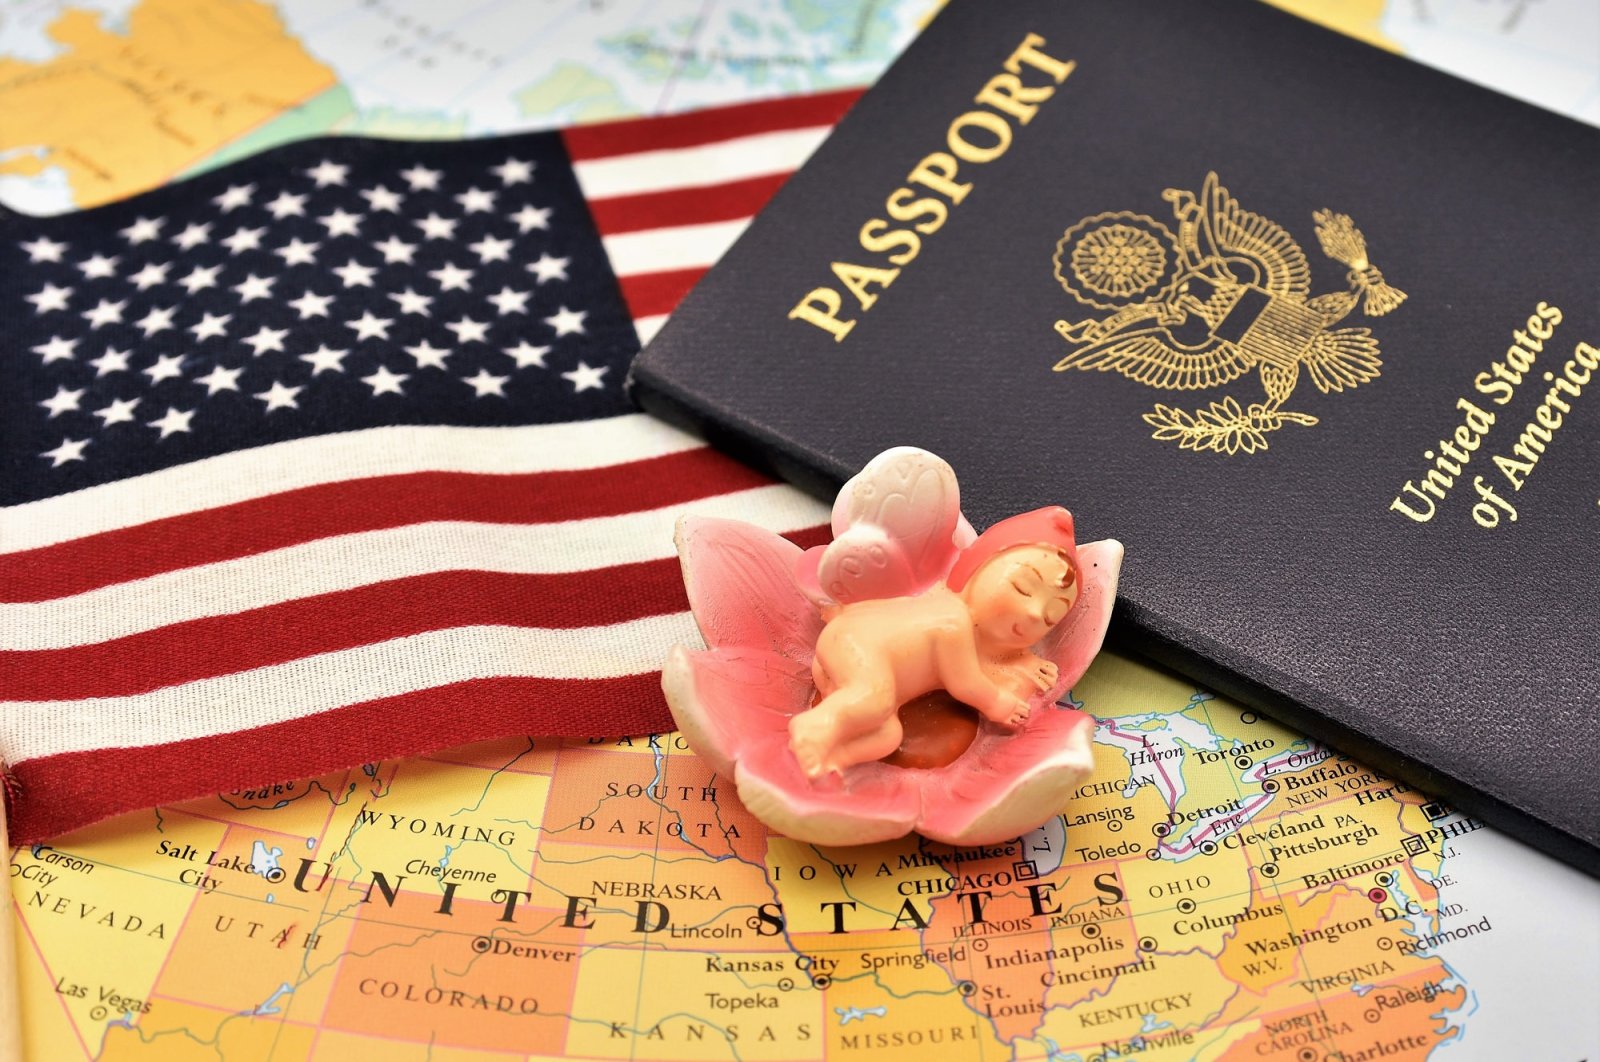 A newborn baby figurine, a U.S. flag and a passport placed together on the political map of America to depict the birthright to citizenship.(iStock Photo)